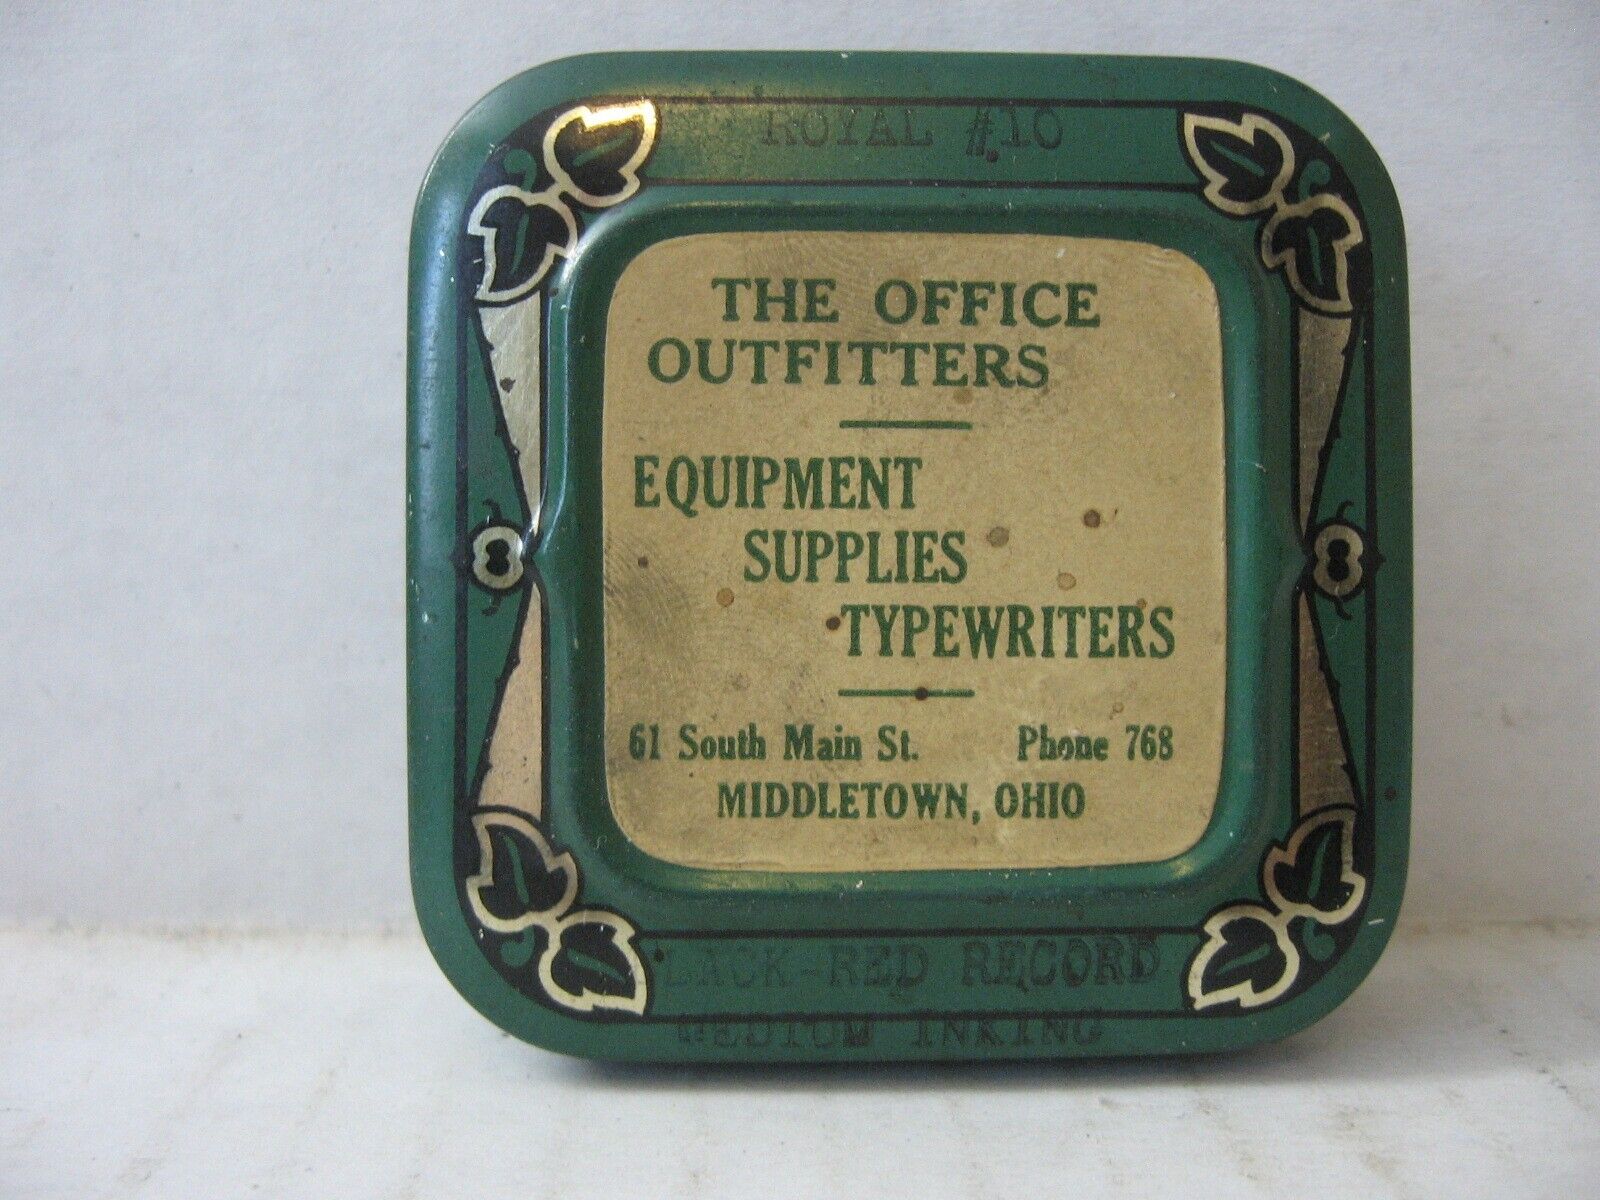 The Office Outfitters Middletown Ohio Tin Can Advertising